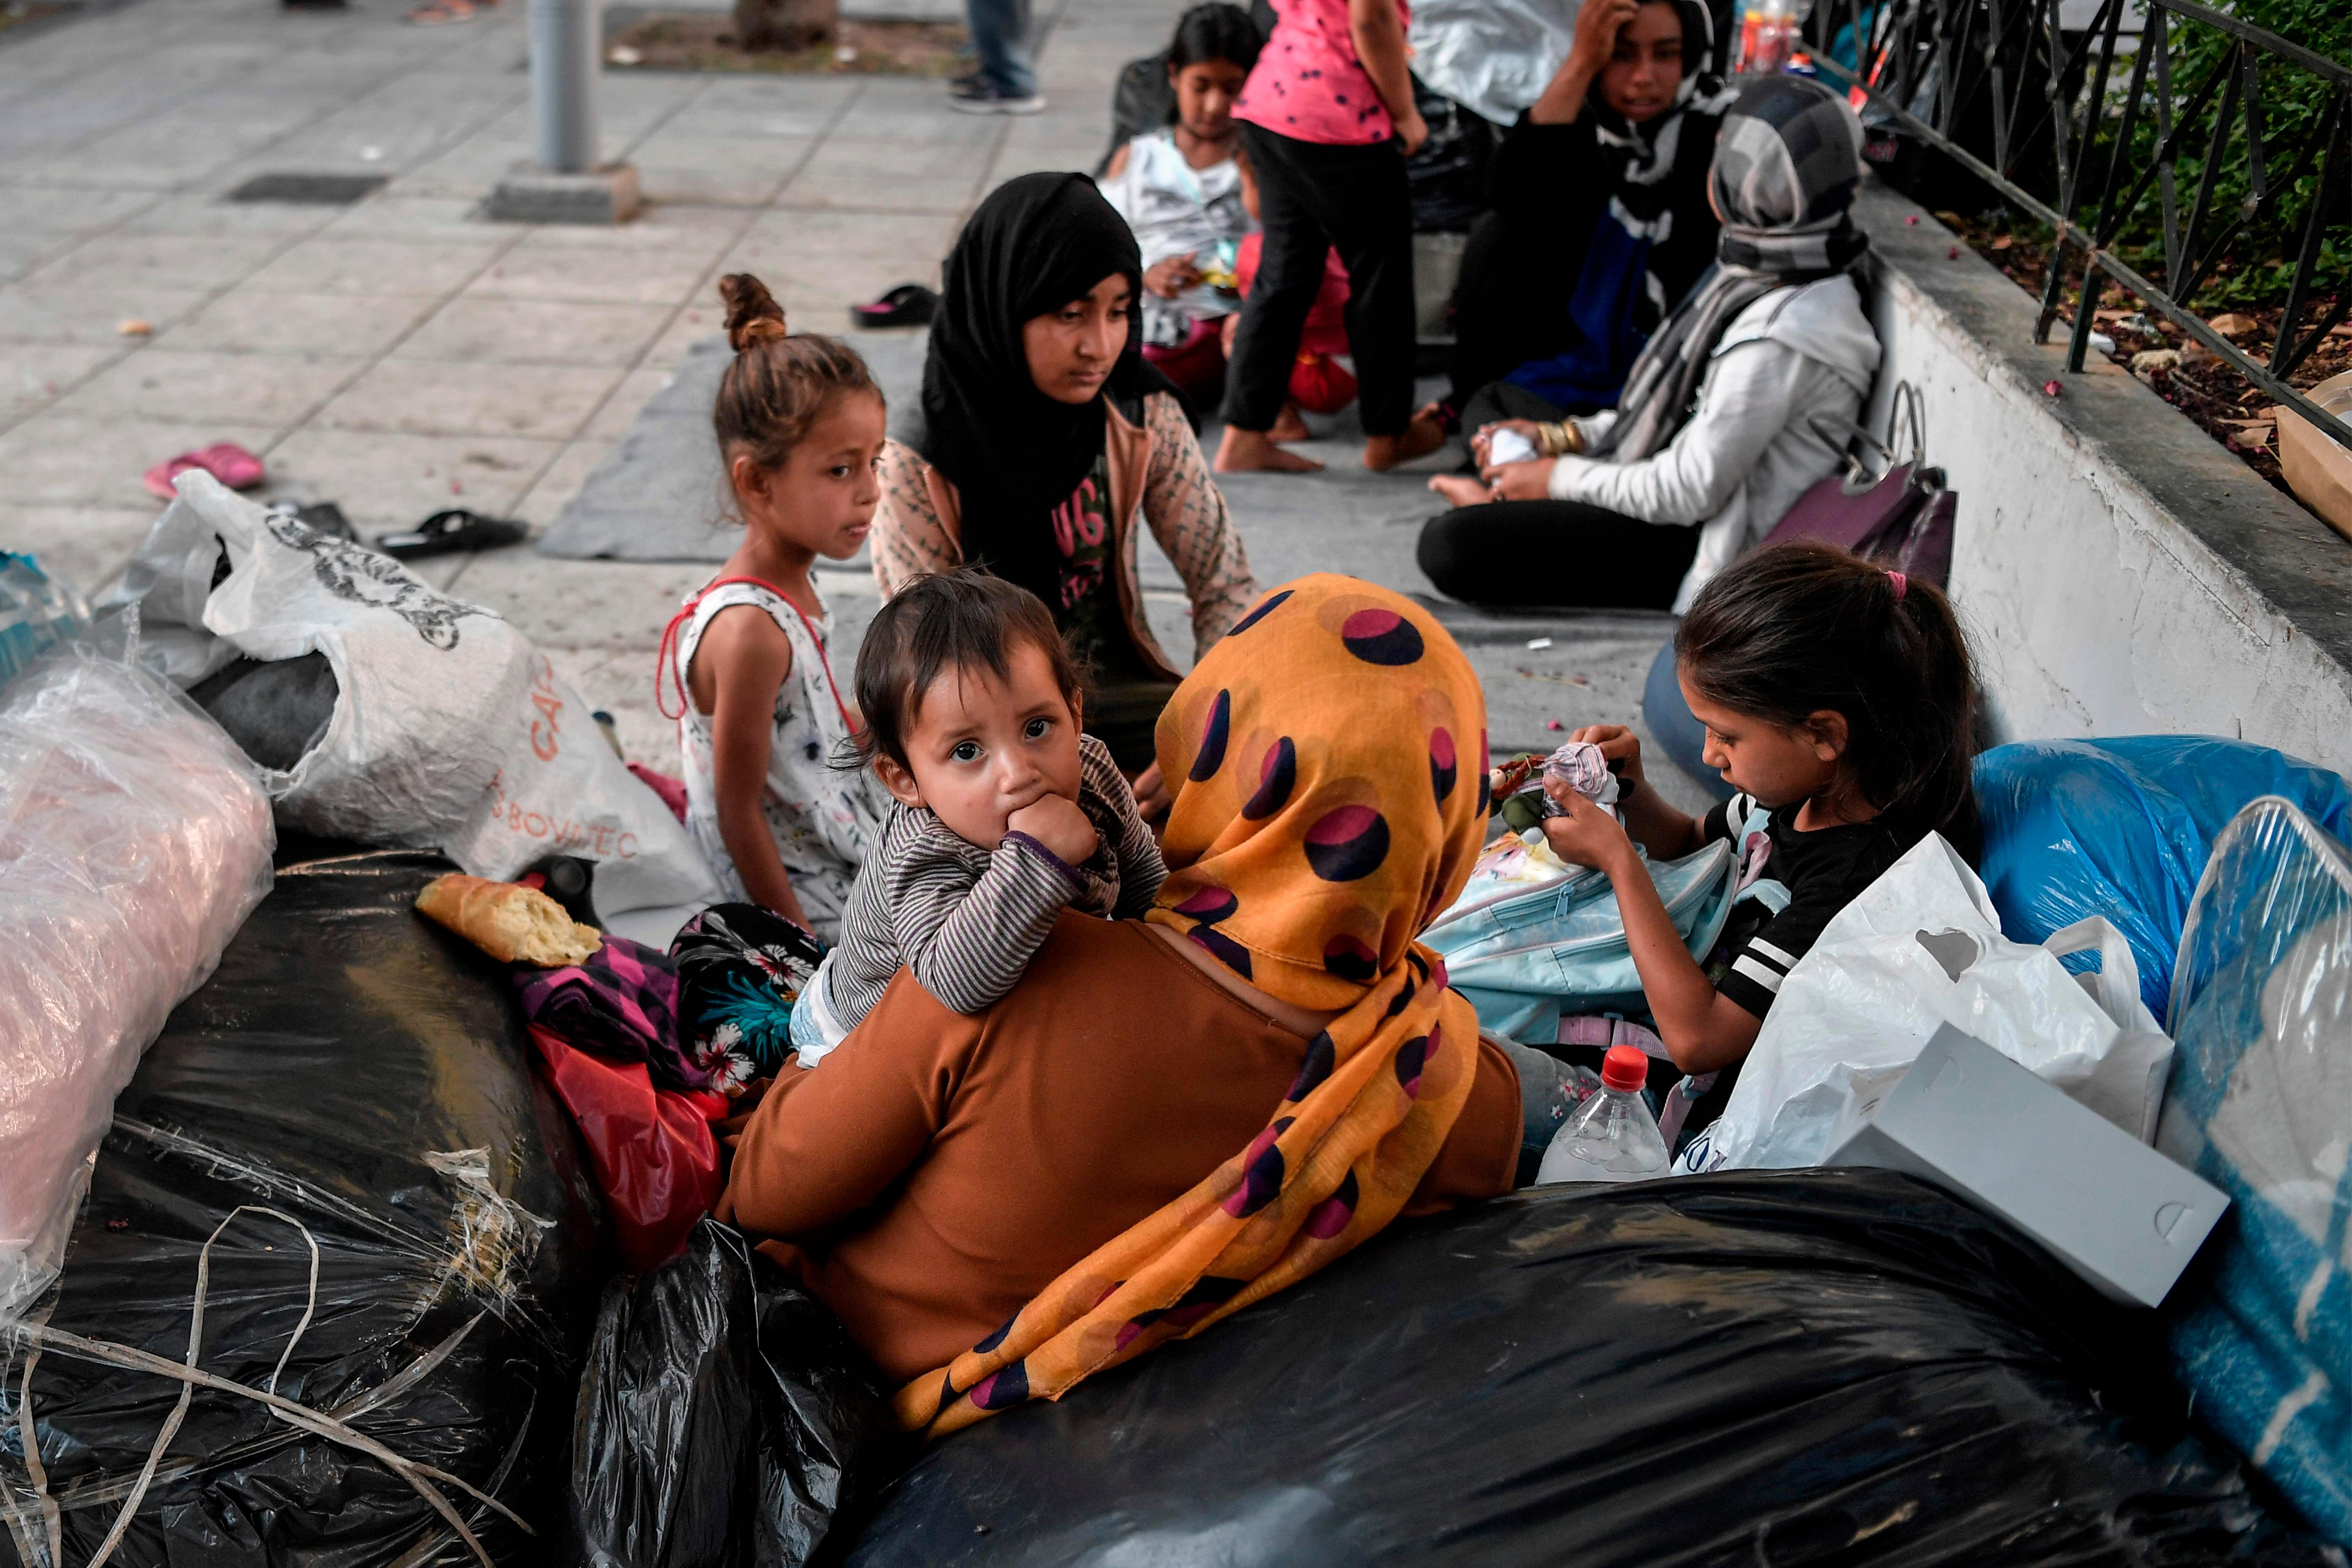 A child looks on as Afghan families who arrived, from Moria camp on the island of Lesbos camp, at an central Athens square on June 14, 2020 after receiving a blue stamp which allowed them to travel to the mainland. - At least 66 refugees, who arrived from the island after their asylum applications where approved, camp on the square as they have no place to stay in Athens. (Photo by Louisa GOULIAMAKI / AFP)